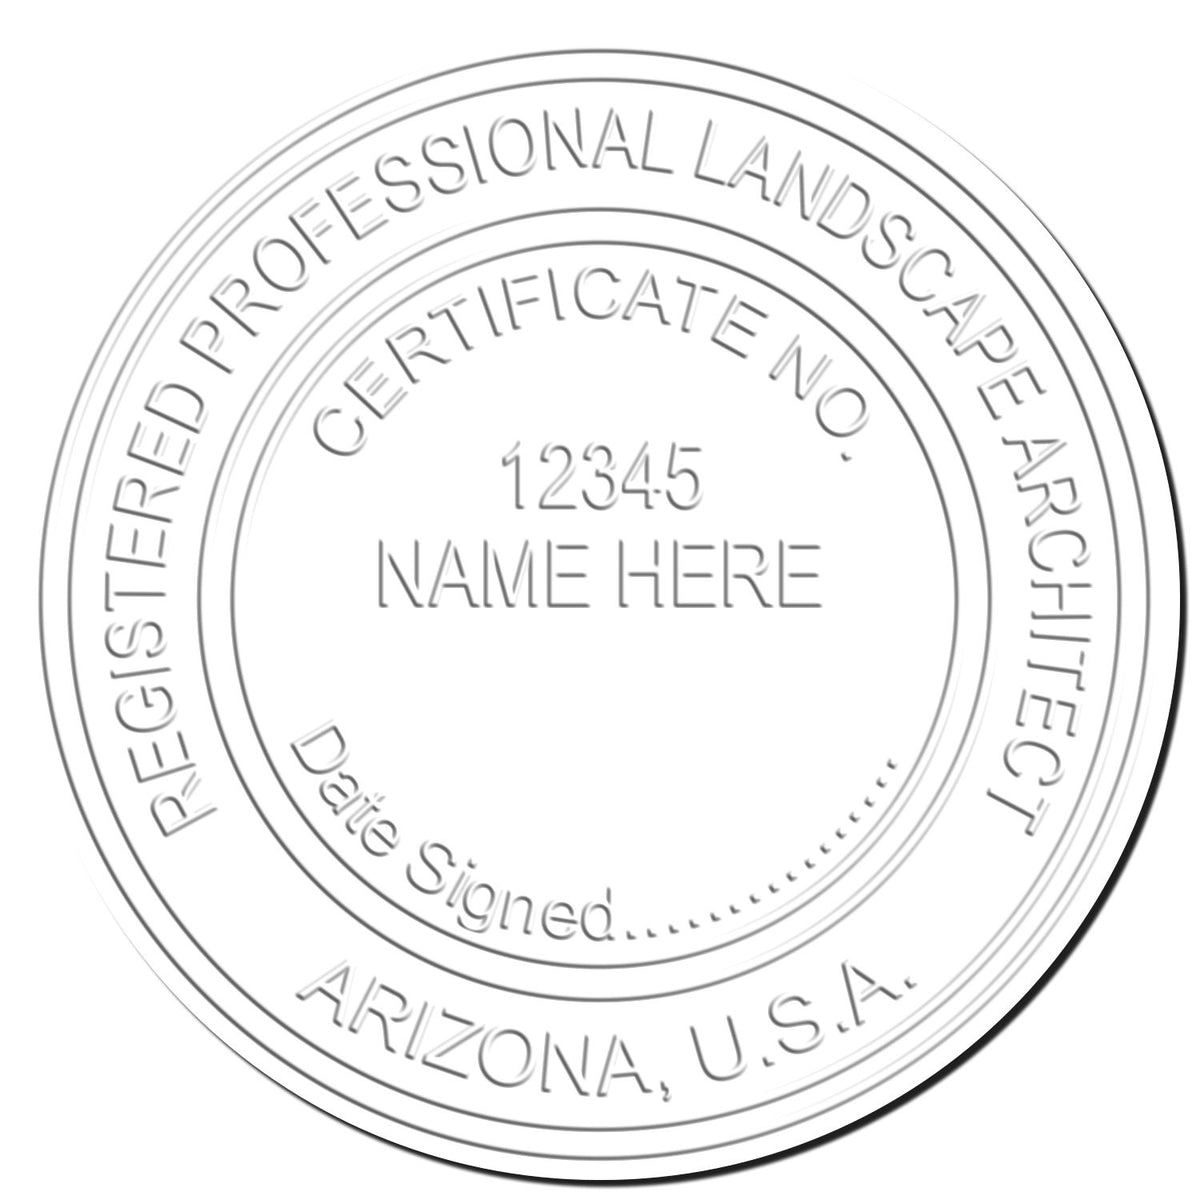 This paper is stamped with a sample imprint of the Hybrid Arizona Landscape Architect Seal, signifying its quality and reliability.